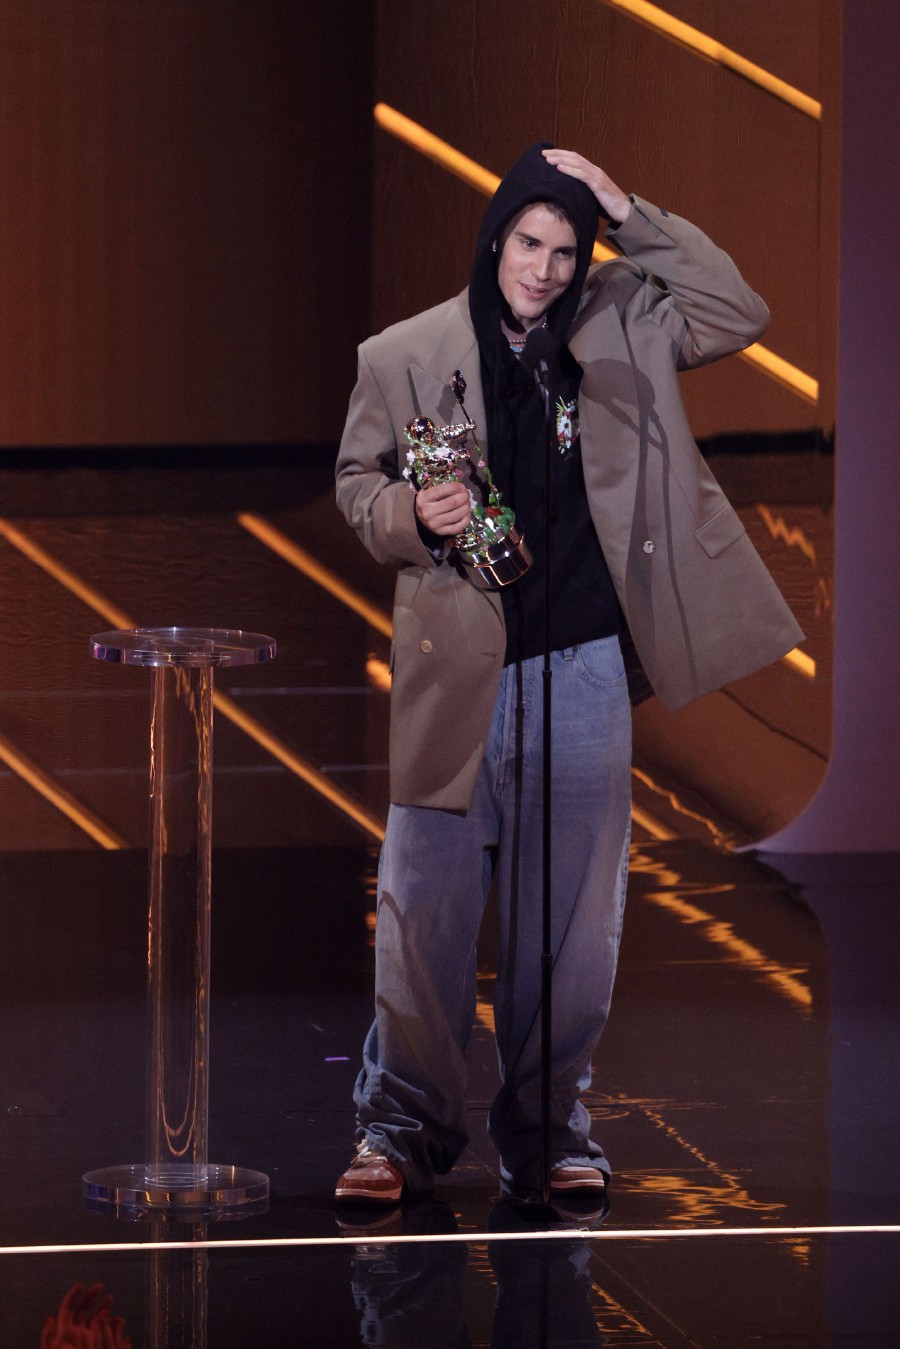  Justin Bieber accepts the Artist of the Year award onstage during the 2021 MTV Video Music Awards at Barclays Center on September 12, 2021 in the Brooklyn borough of New York City. - AFP PIC